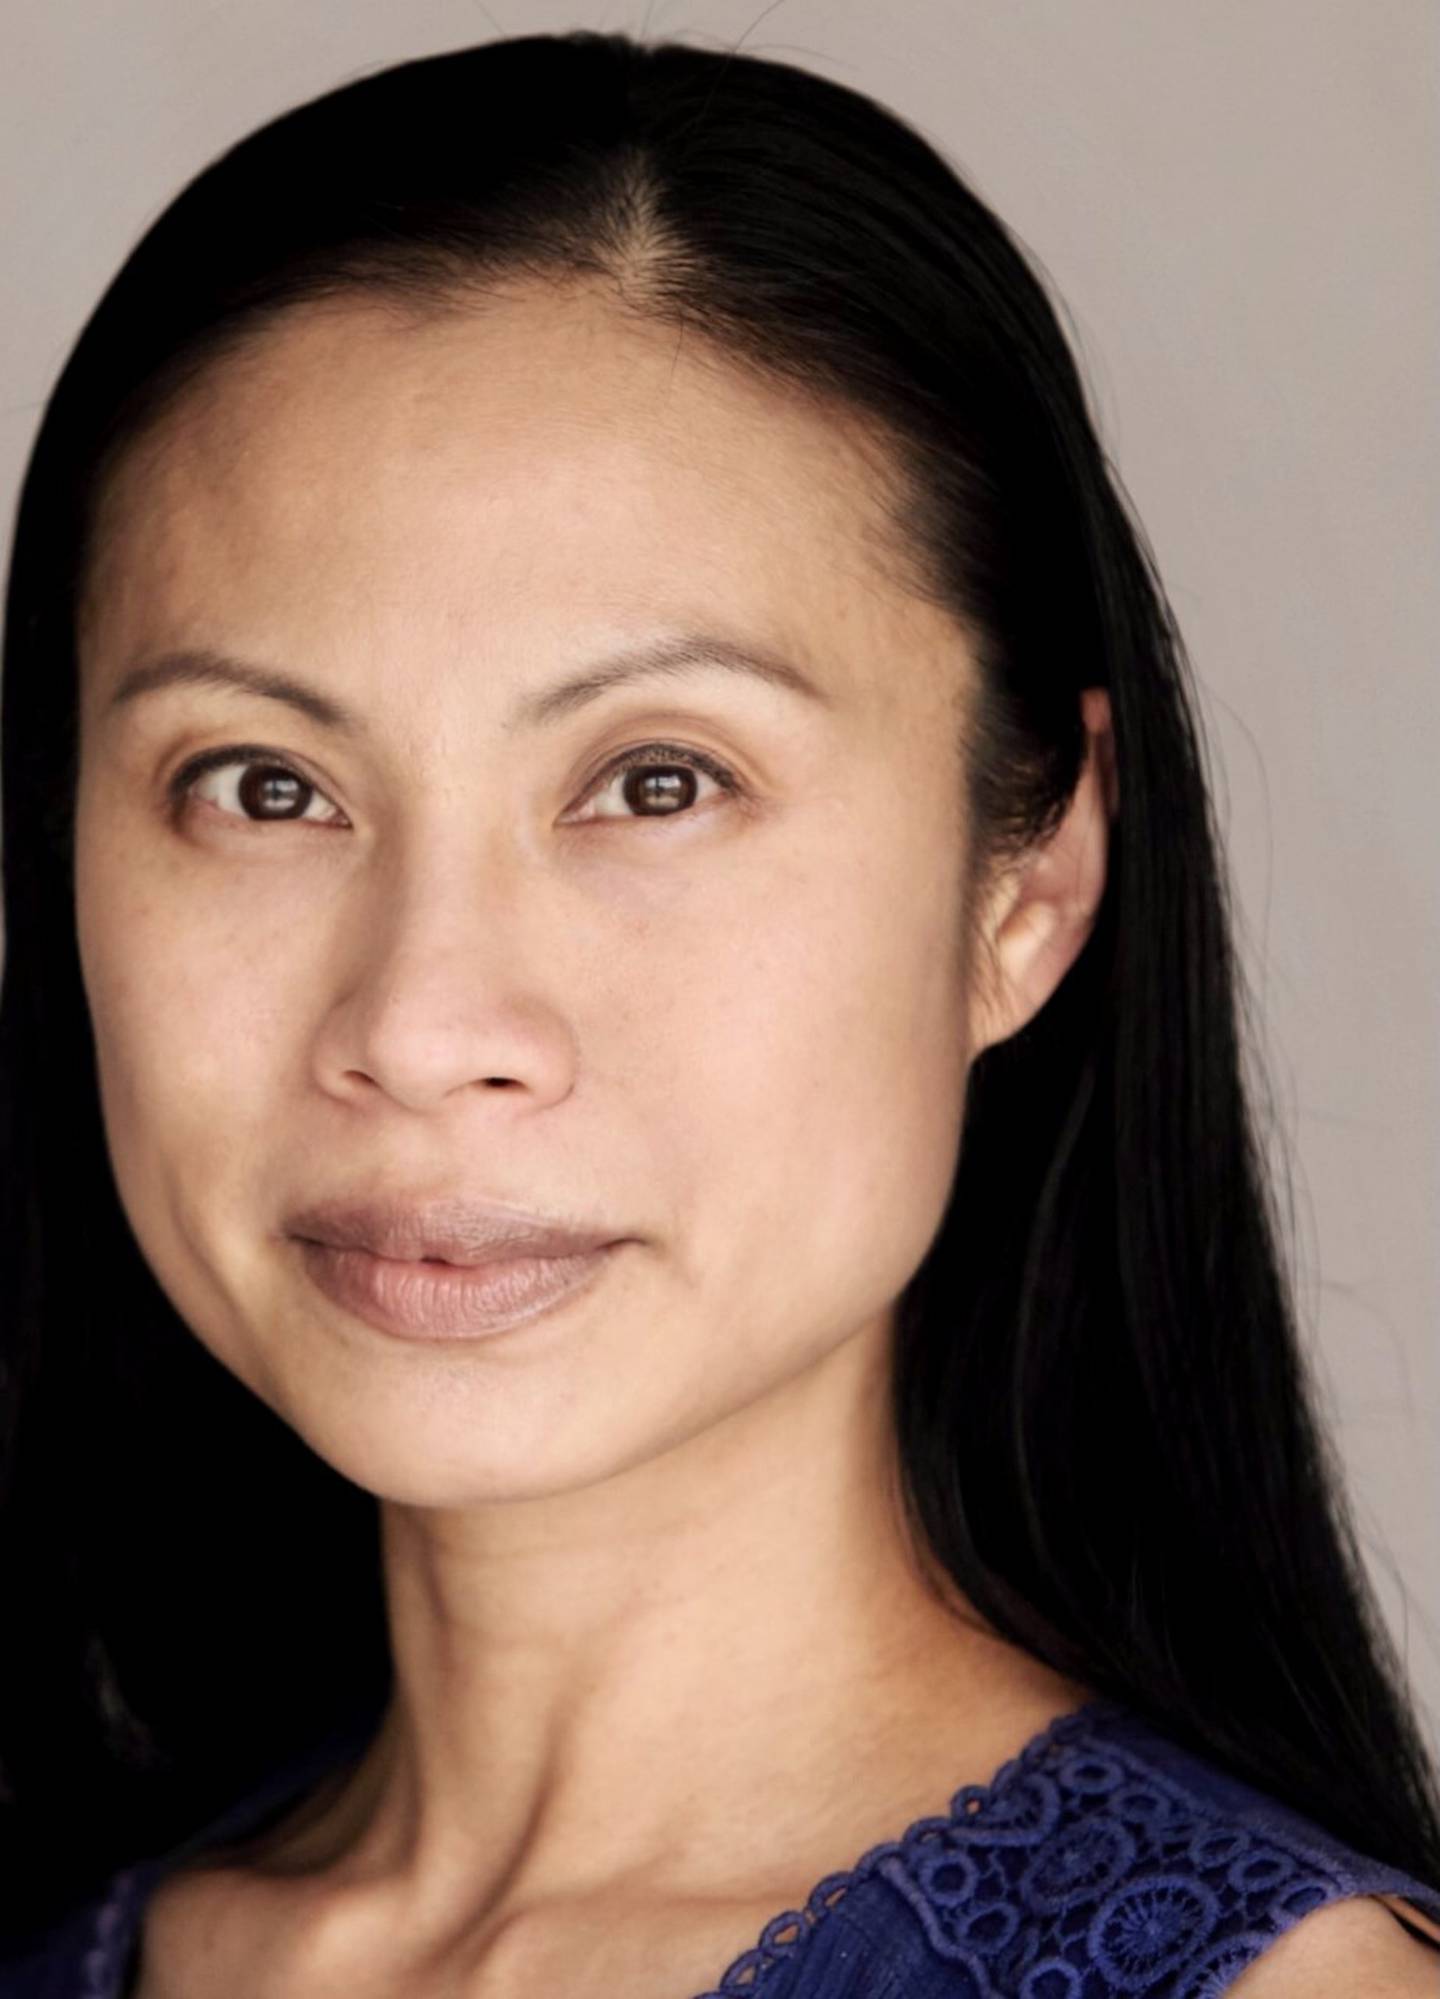 Tuyet Thi Pham will star in the first play she wrote, Dinner and Cake, at Everyman theater.